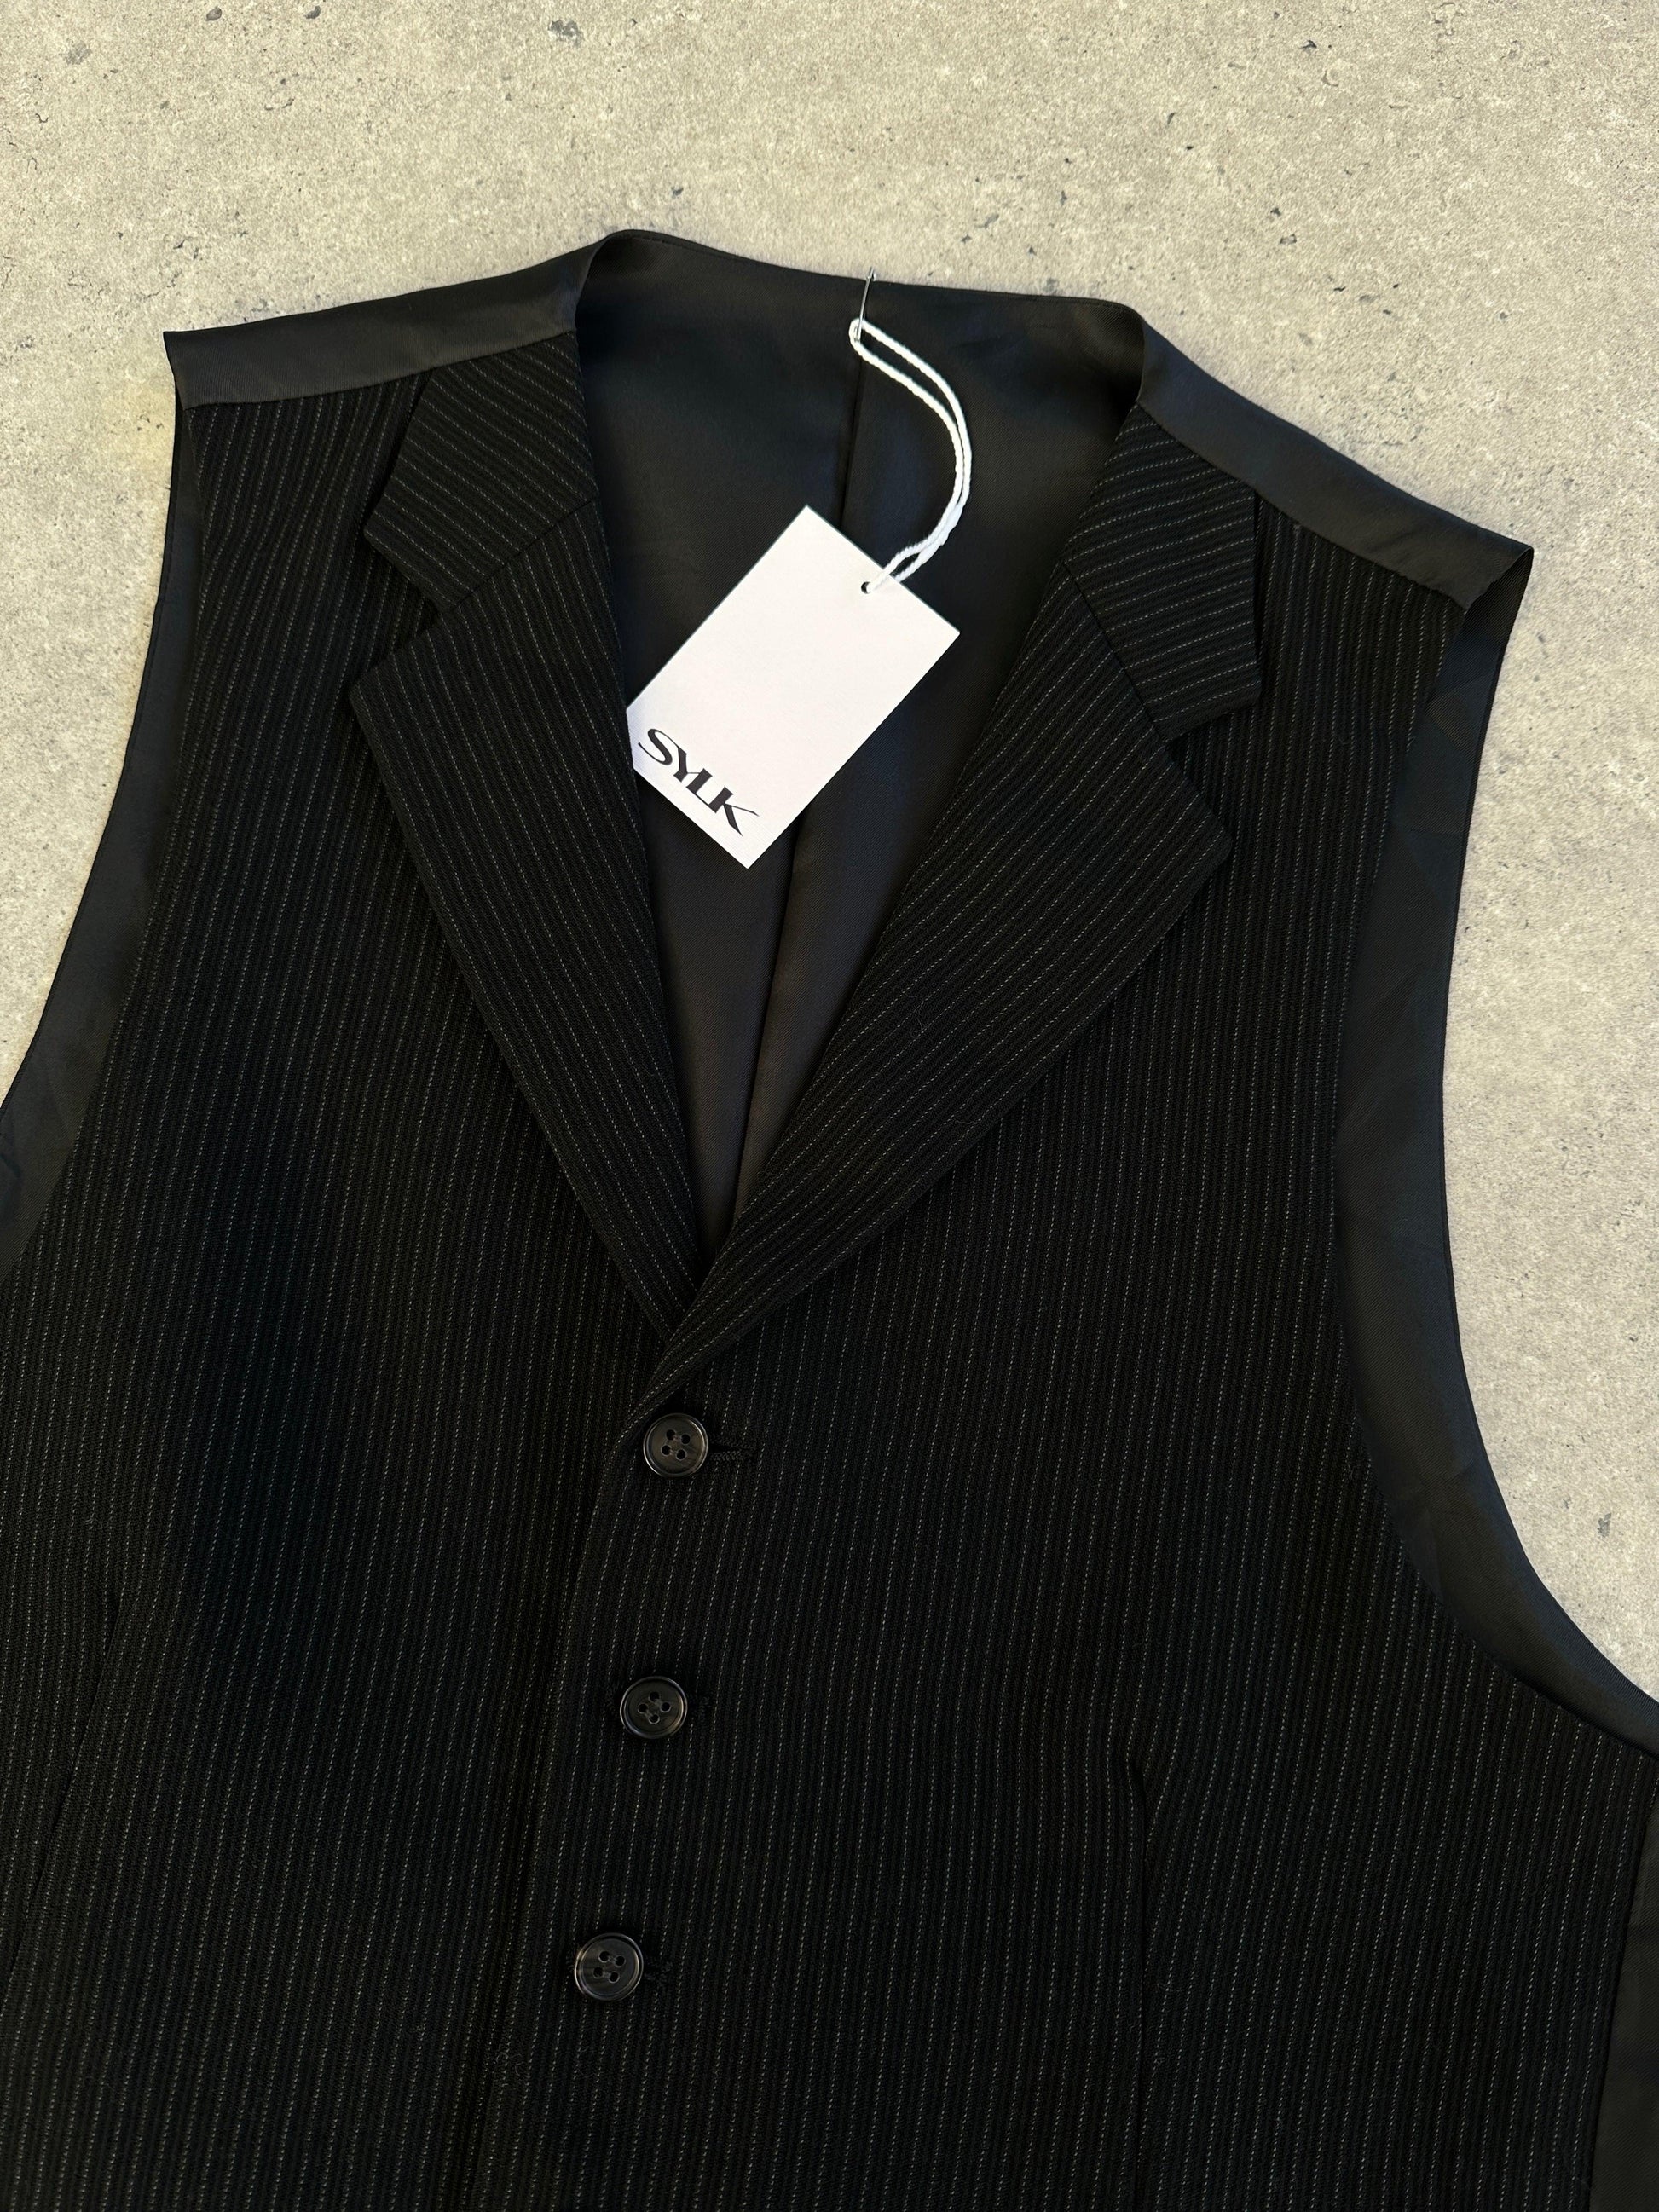 Vintage Wool Pinstripe Collared Waistcoat - L - Known Source